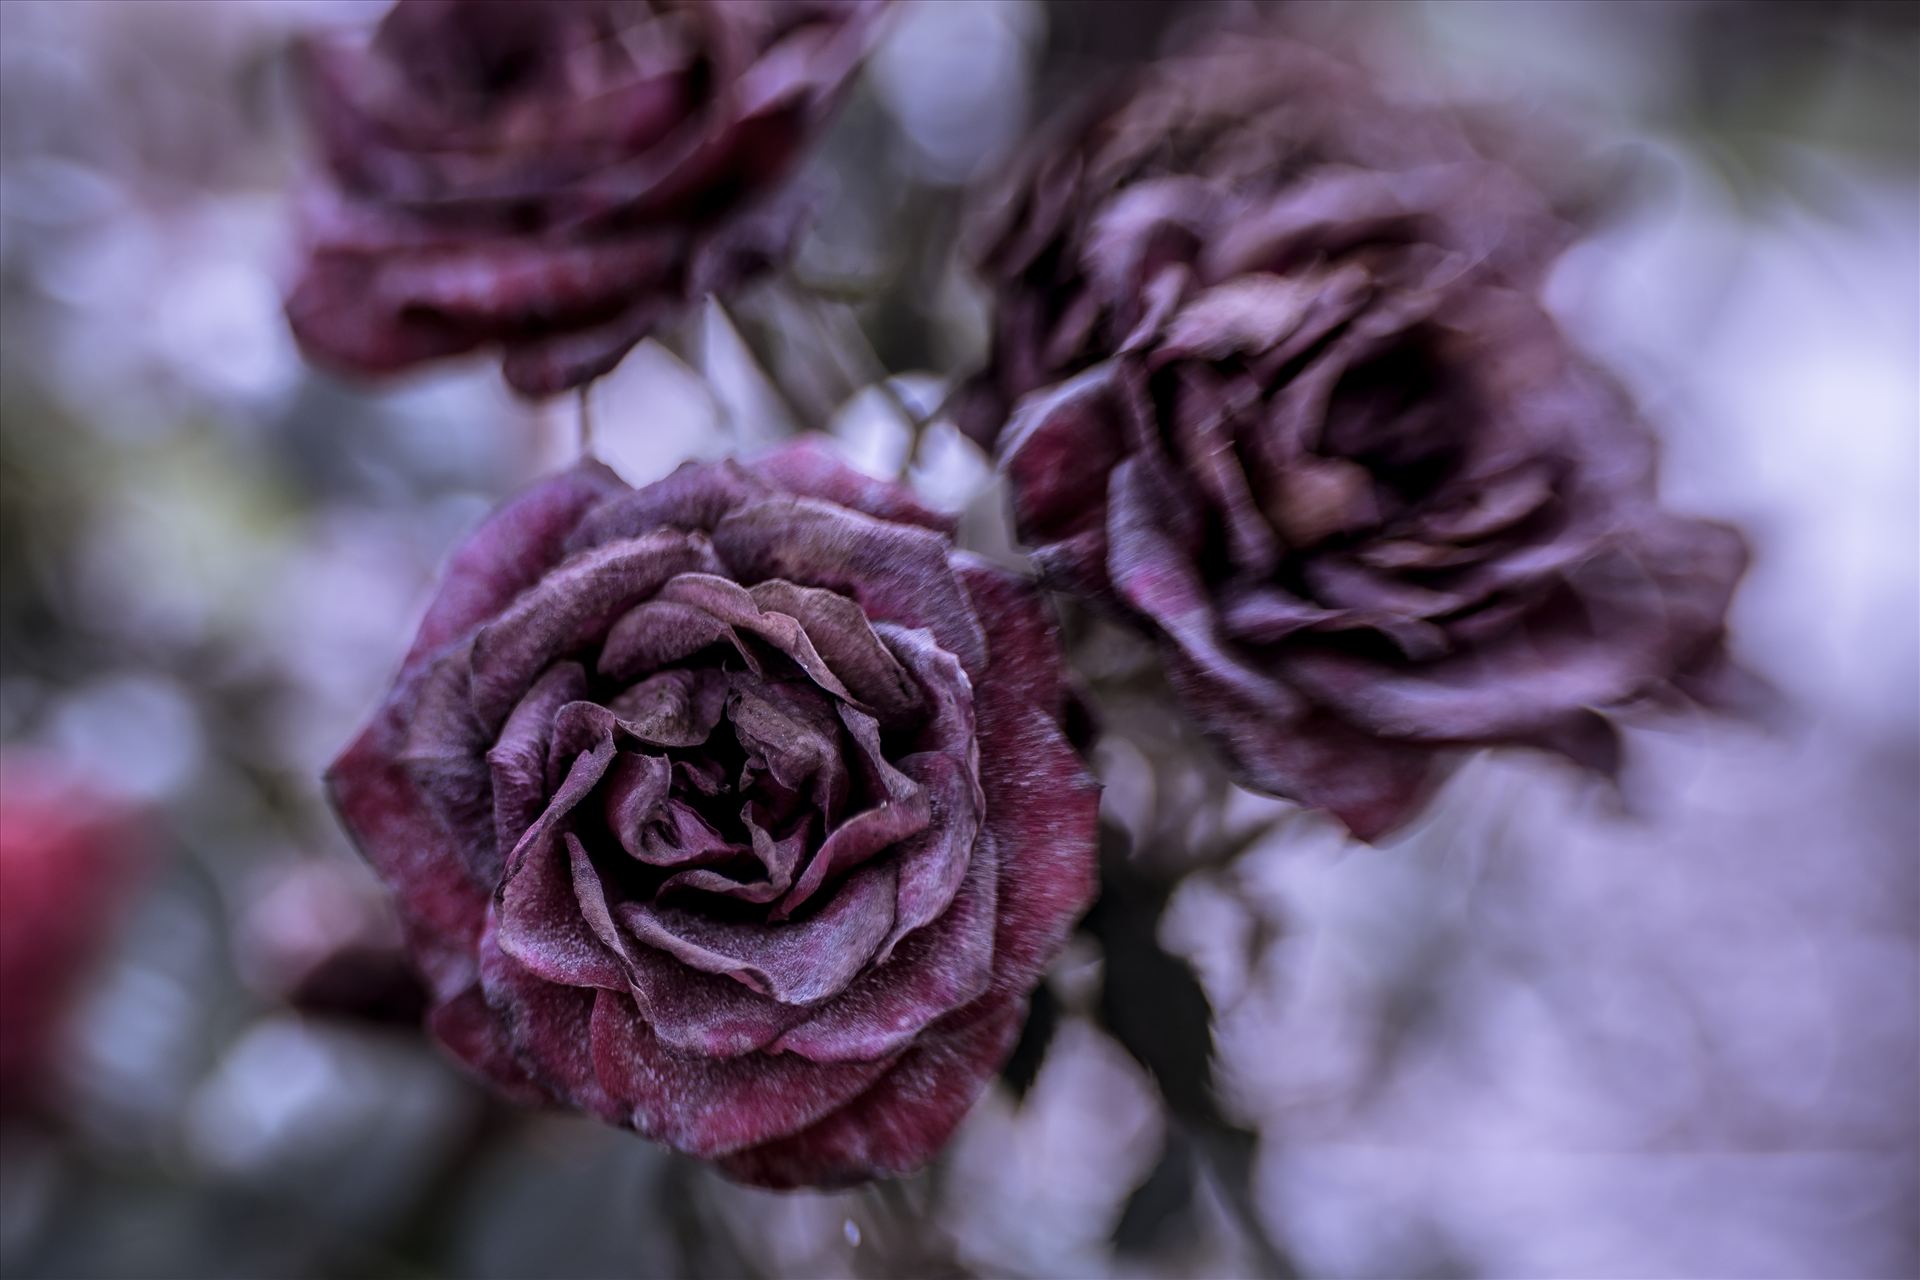 Frozen Rose.jpg Dried roses frozen in time by Sarah Williams